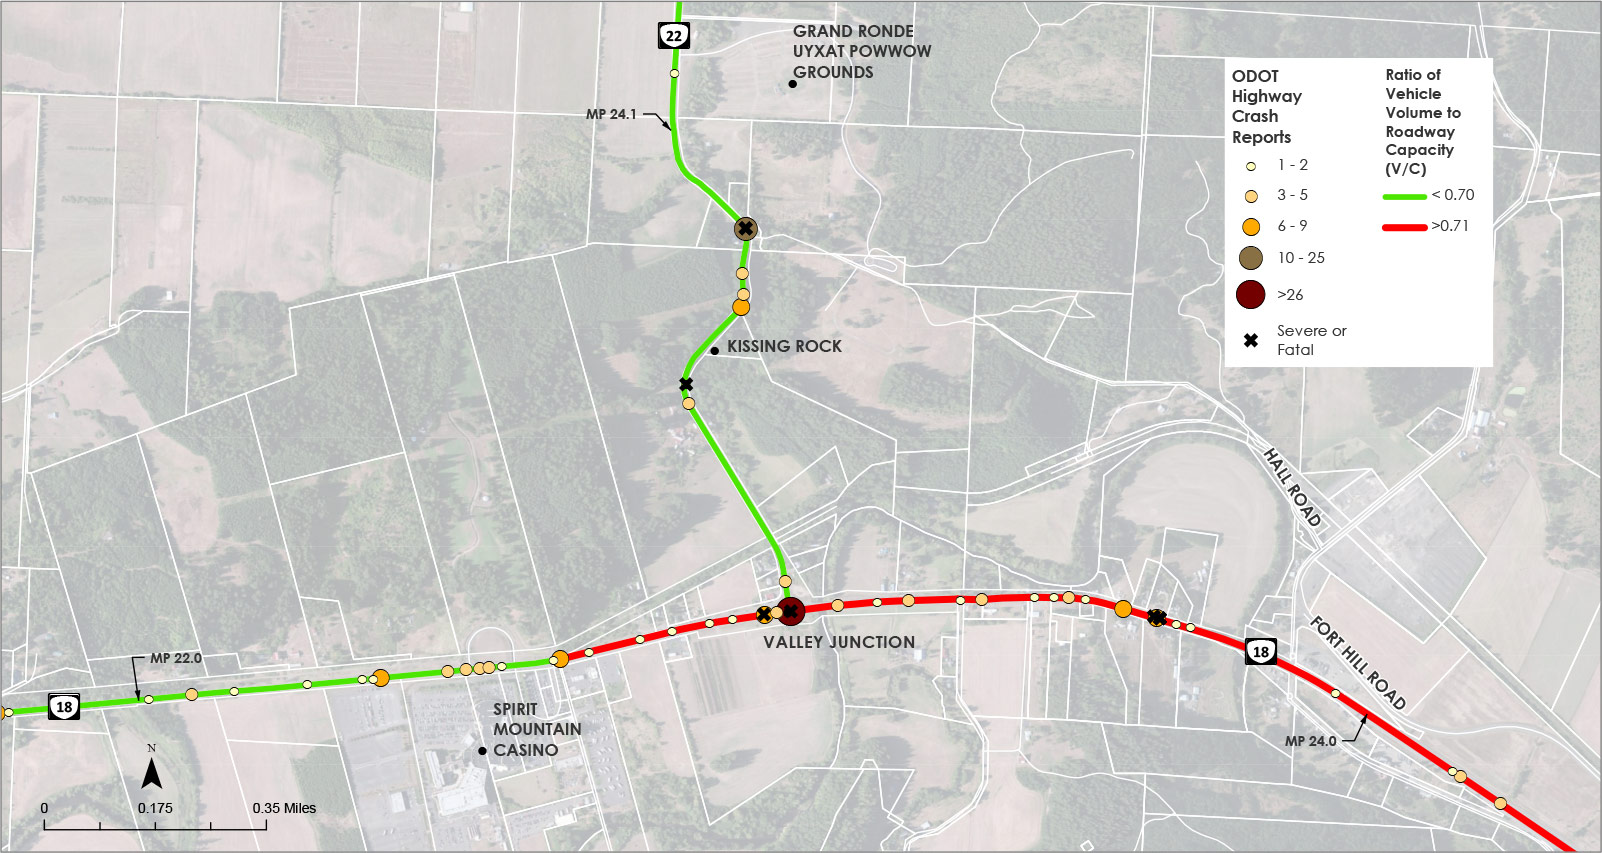 Map of the project area showing congestion and reported crashes from 2015-2019. OR 18 east of the Casino is shown as congested (red line) and OR 22 and OR 18 west of the Casino are shown as green lines (less congested). Crashes locations are shown throughout the area with the most at the intersection of OR 18/22, including two severe or fatal crashes. Additional fatal or severe crashes are shown near Kissing Rock (2) and OR 18 west of MP 24.0 (2).  